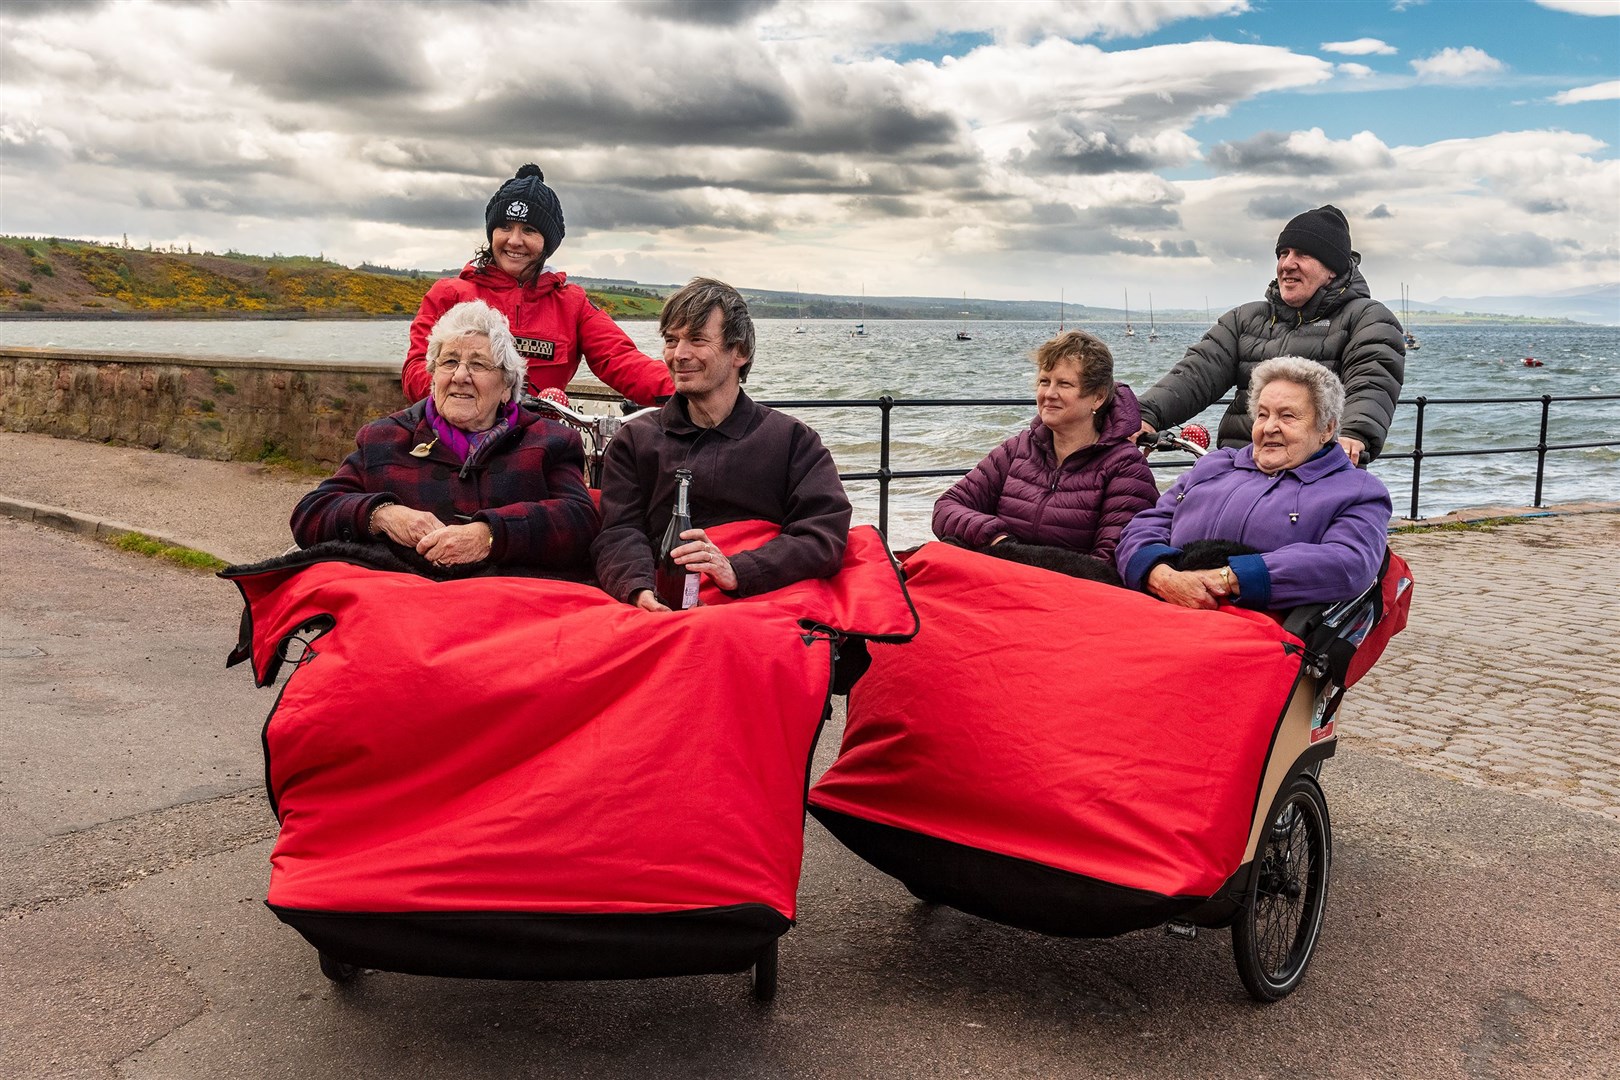 Jean Young, Ian Rankin, Shirley Matheson and June Shepherd are given a ride by cycle pilots Fiona Grist and Ian Mitchell.